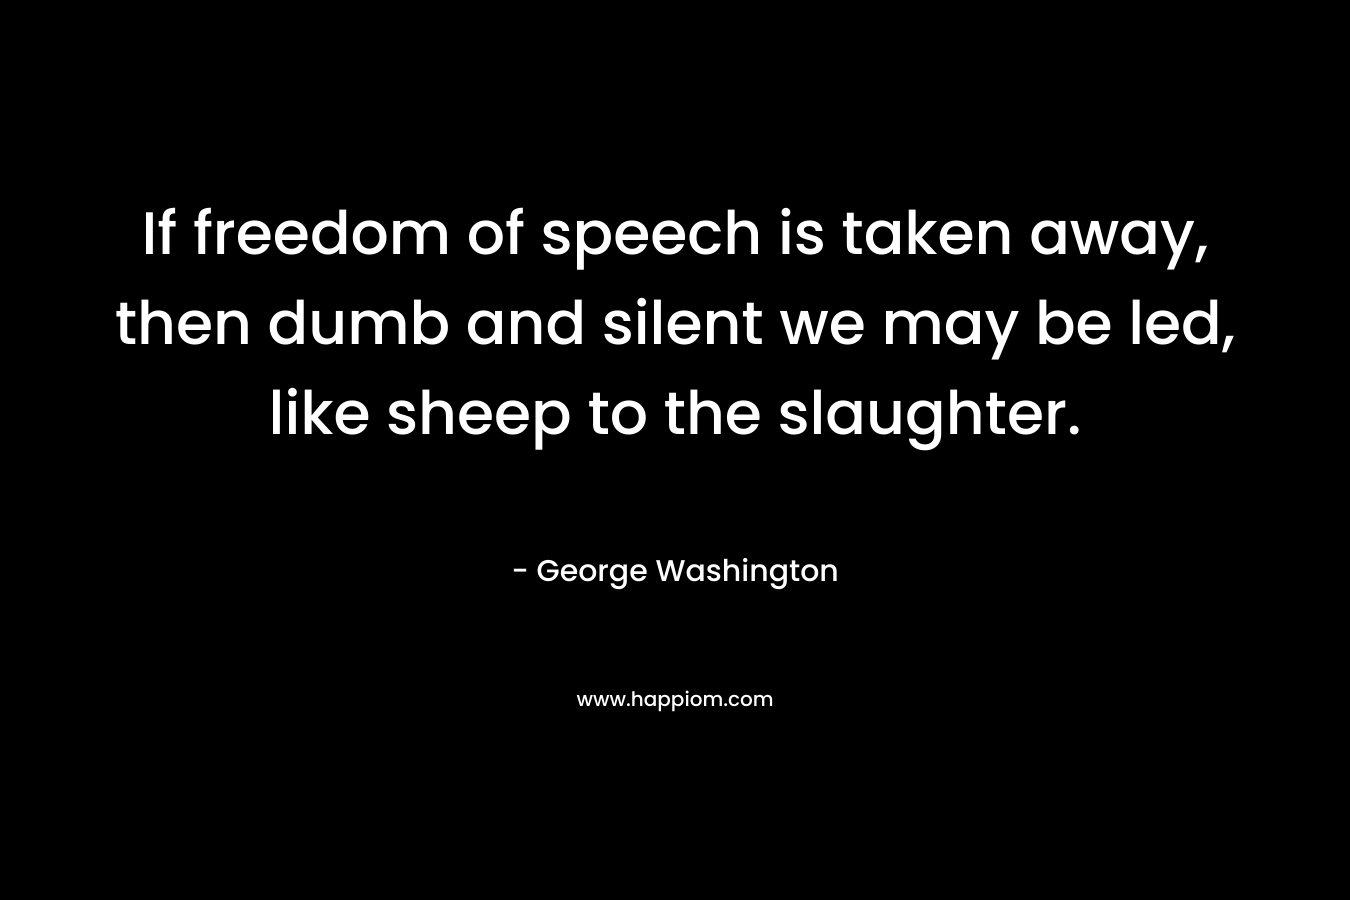 If freedom of speech is taken away, then dumb and silent we may be led, like sheep to the slaughter.